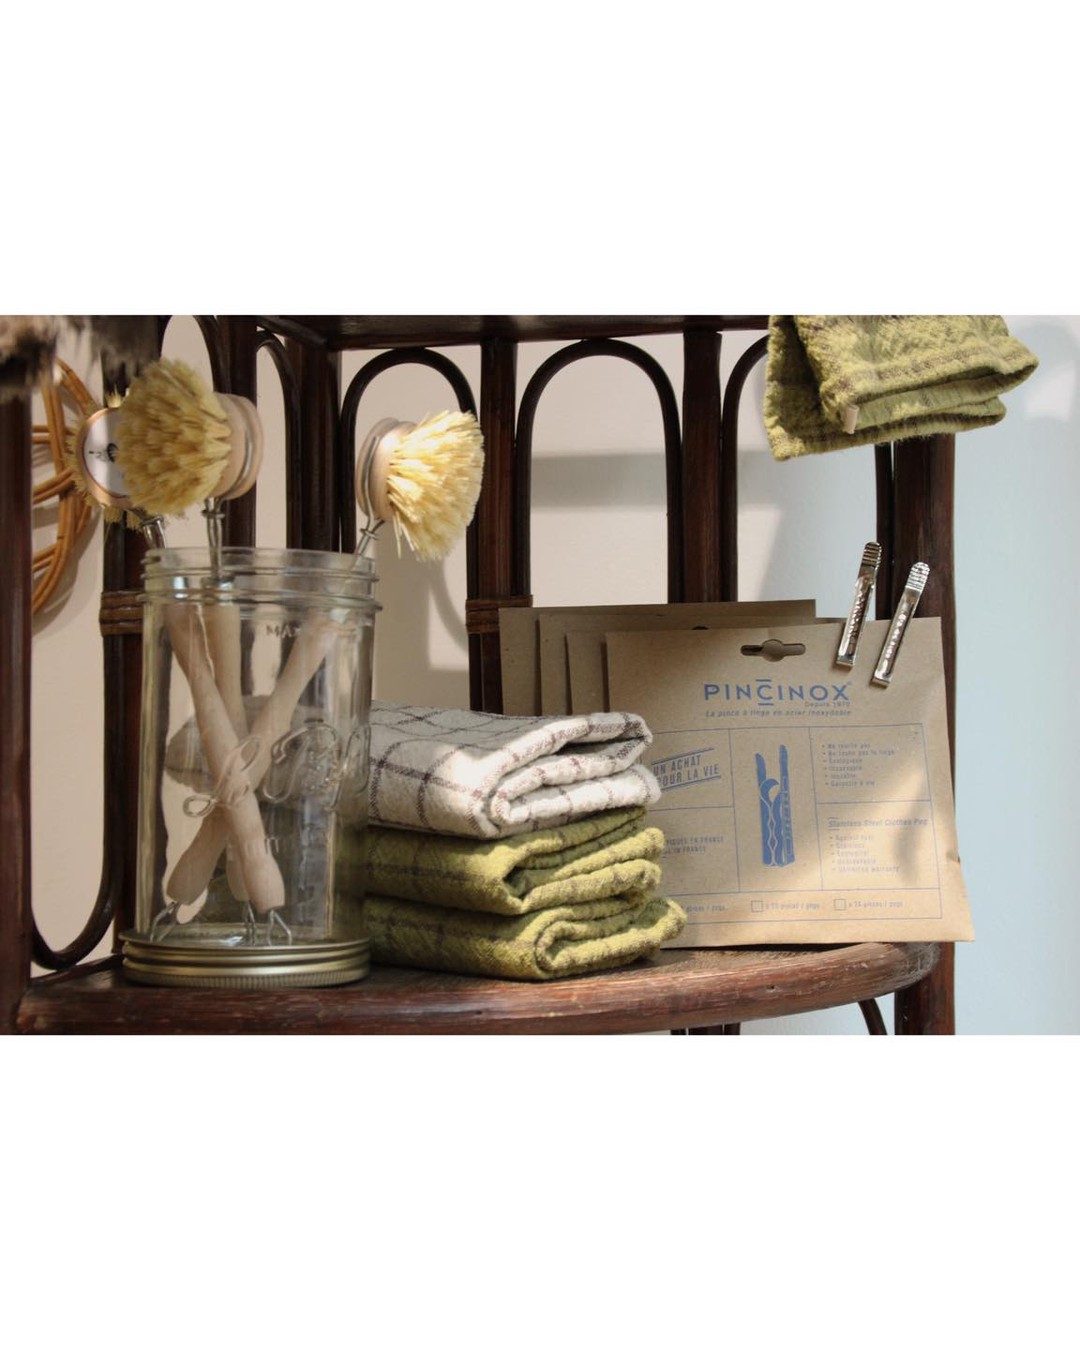 soaps-and-rags-aixenprovence-carlo-app-decoration